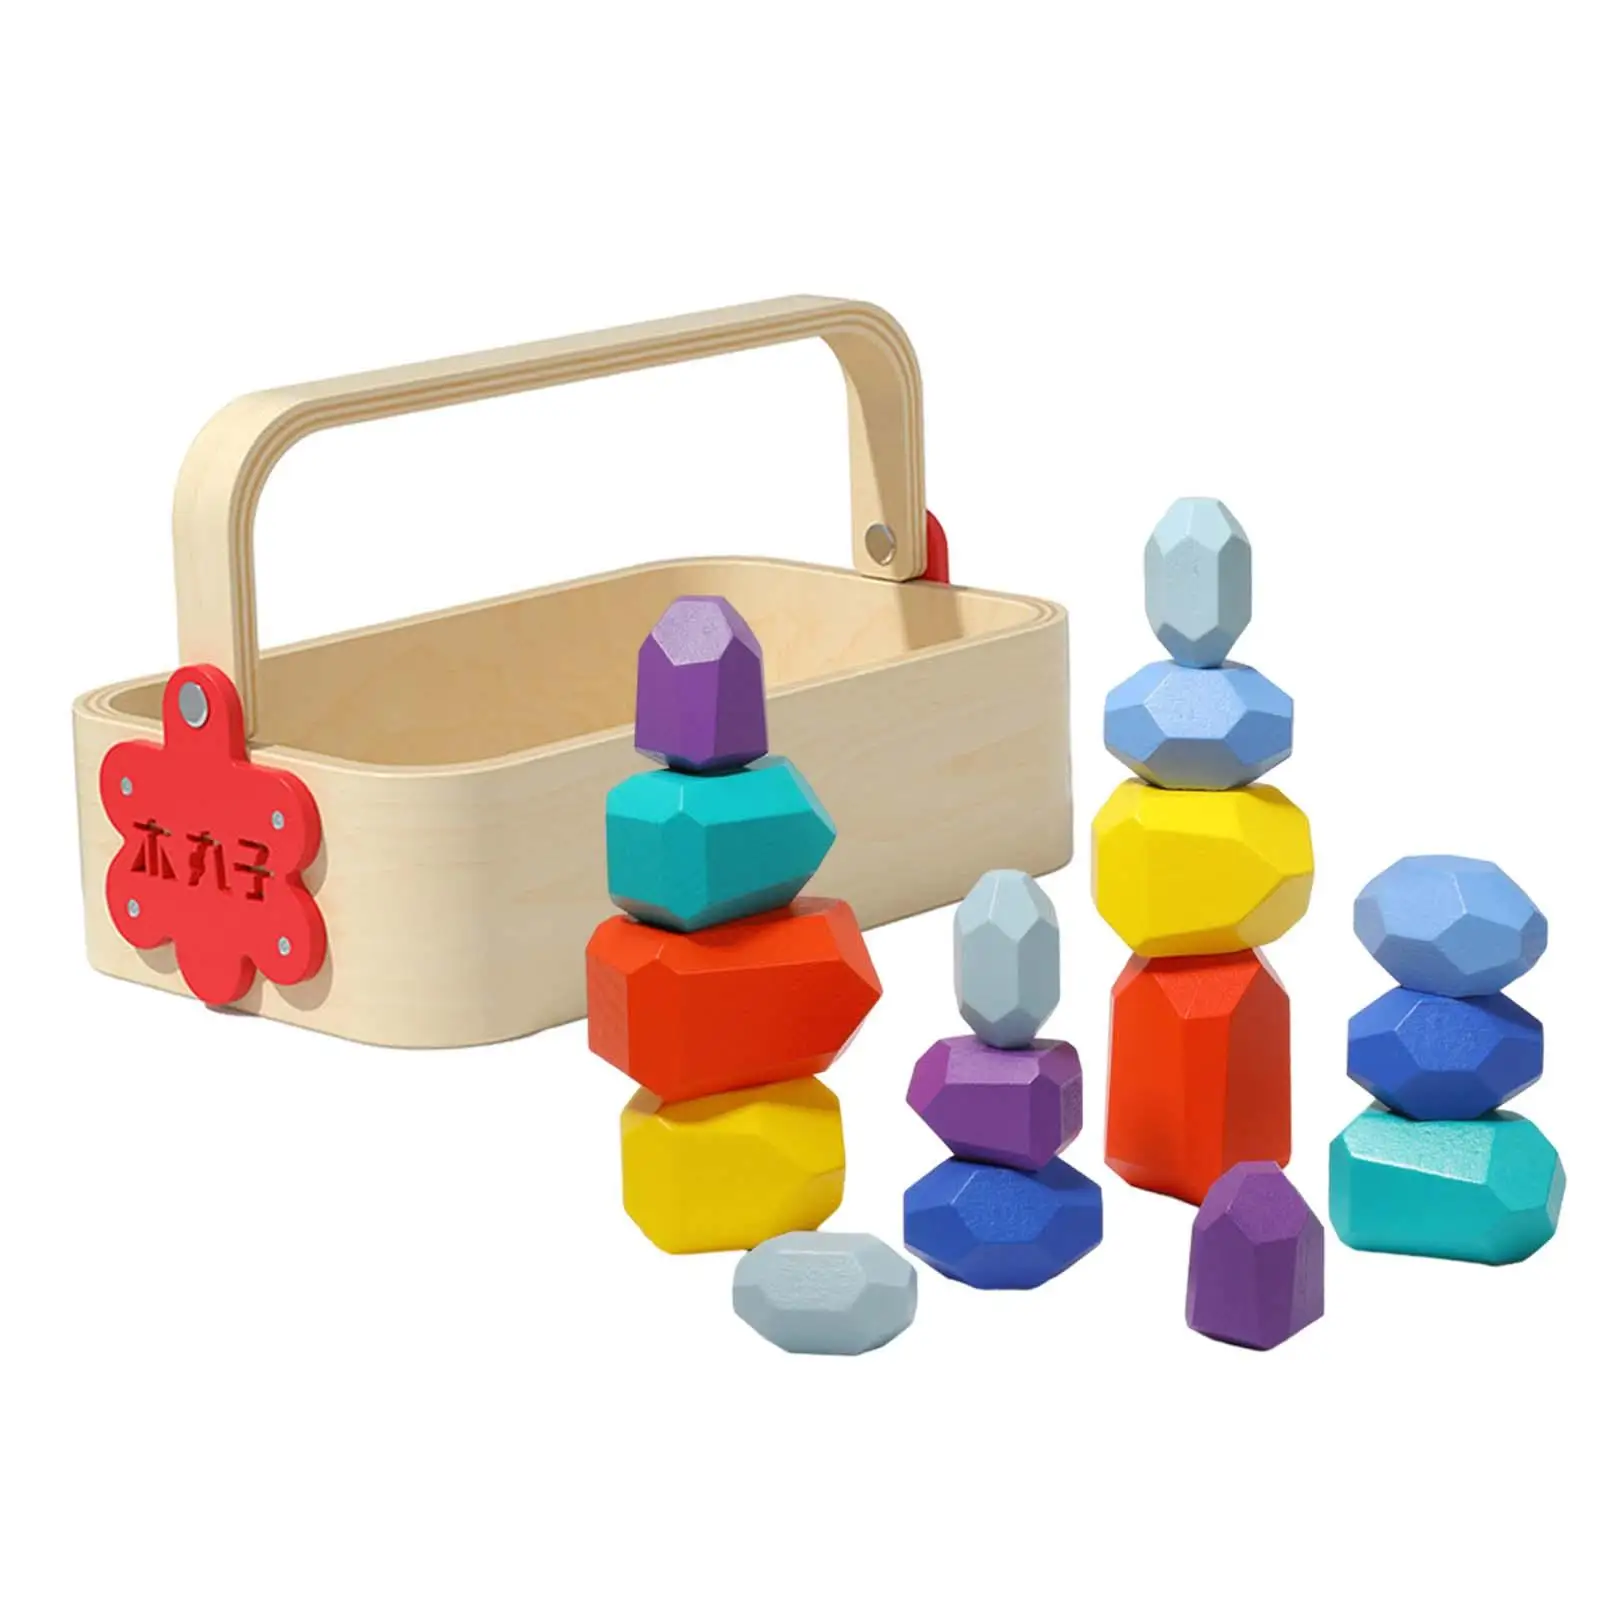 Stacking Blocks Balancing Stacking Hands on with Basket Educational Toy Montessori Toys Colorful Building Blocks for Children